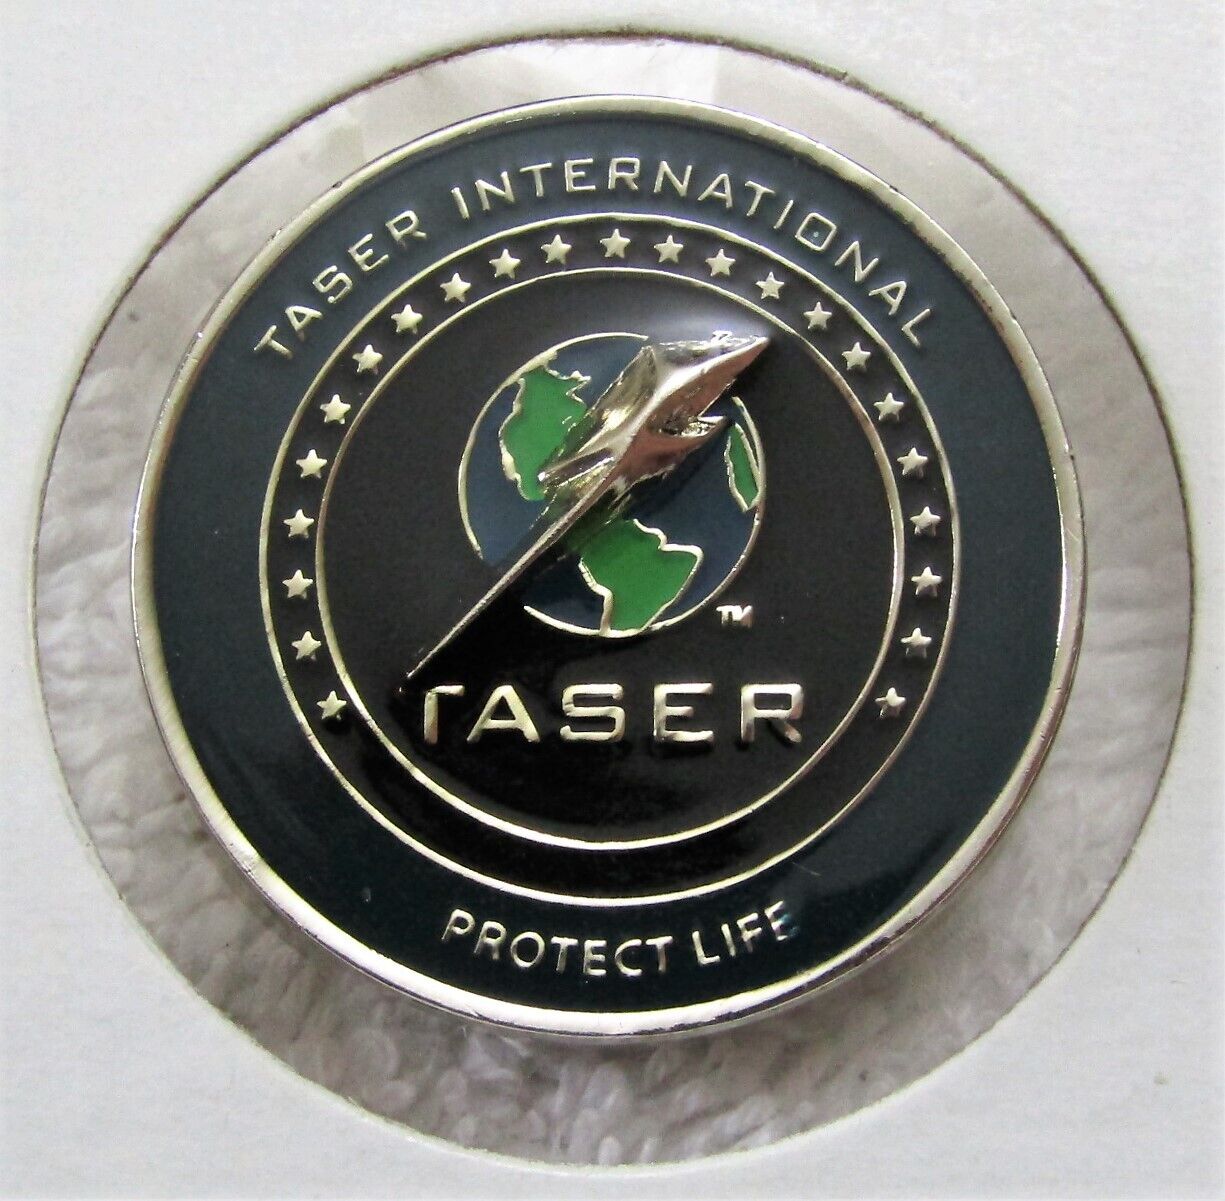 2007 IACP New Orleans Taser International Limited Edition Challenge Coin Token